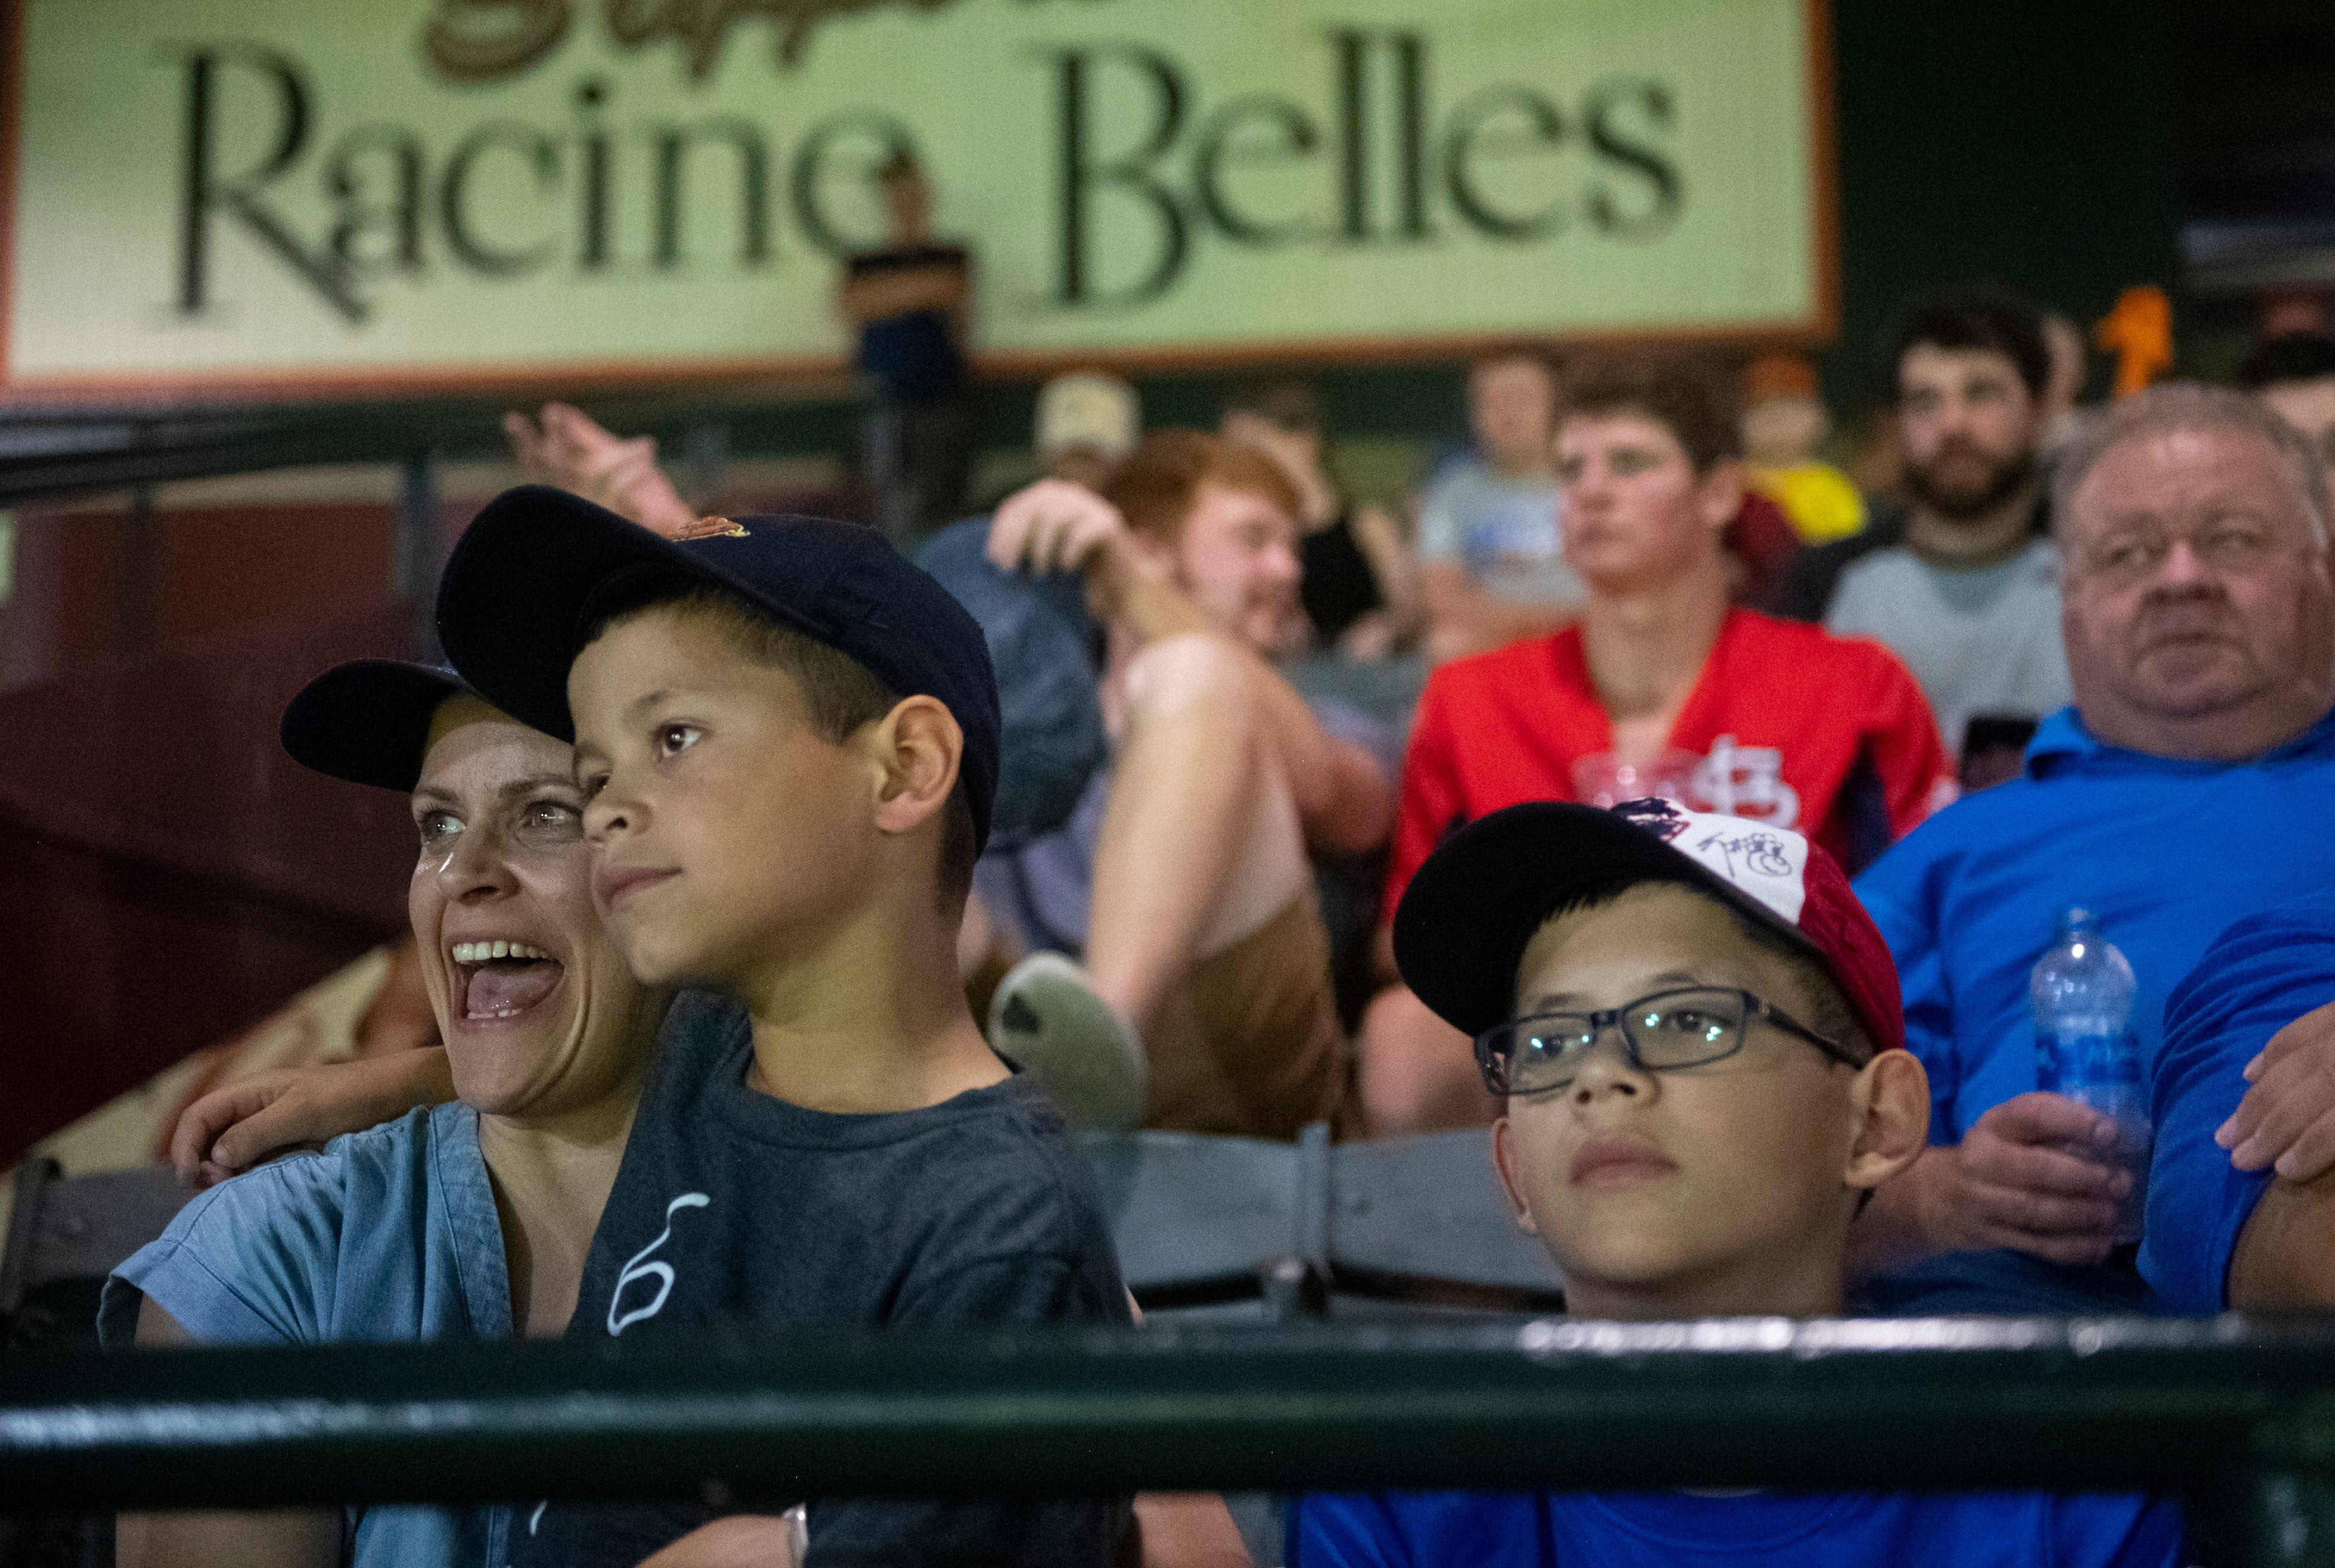 Nicole Lopez, left, Miguel Lopez, 7, middle, and Mateo Lopez, 10, watch the Evansville Otters baseball game at Bosse Field in Evansville, Ind., Friday evening, August 5, 2022. This year is the 30th anniversary of the movie “A League of Their Own” which was partially filmed in Bosse Field.